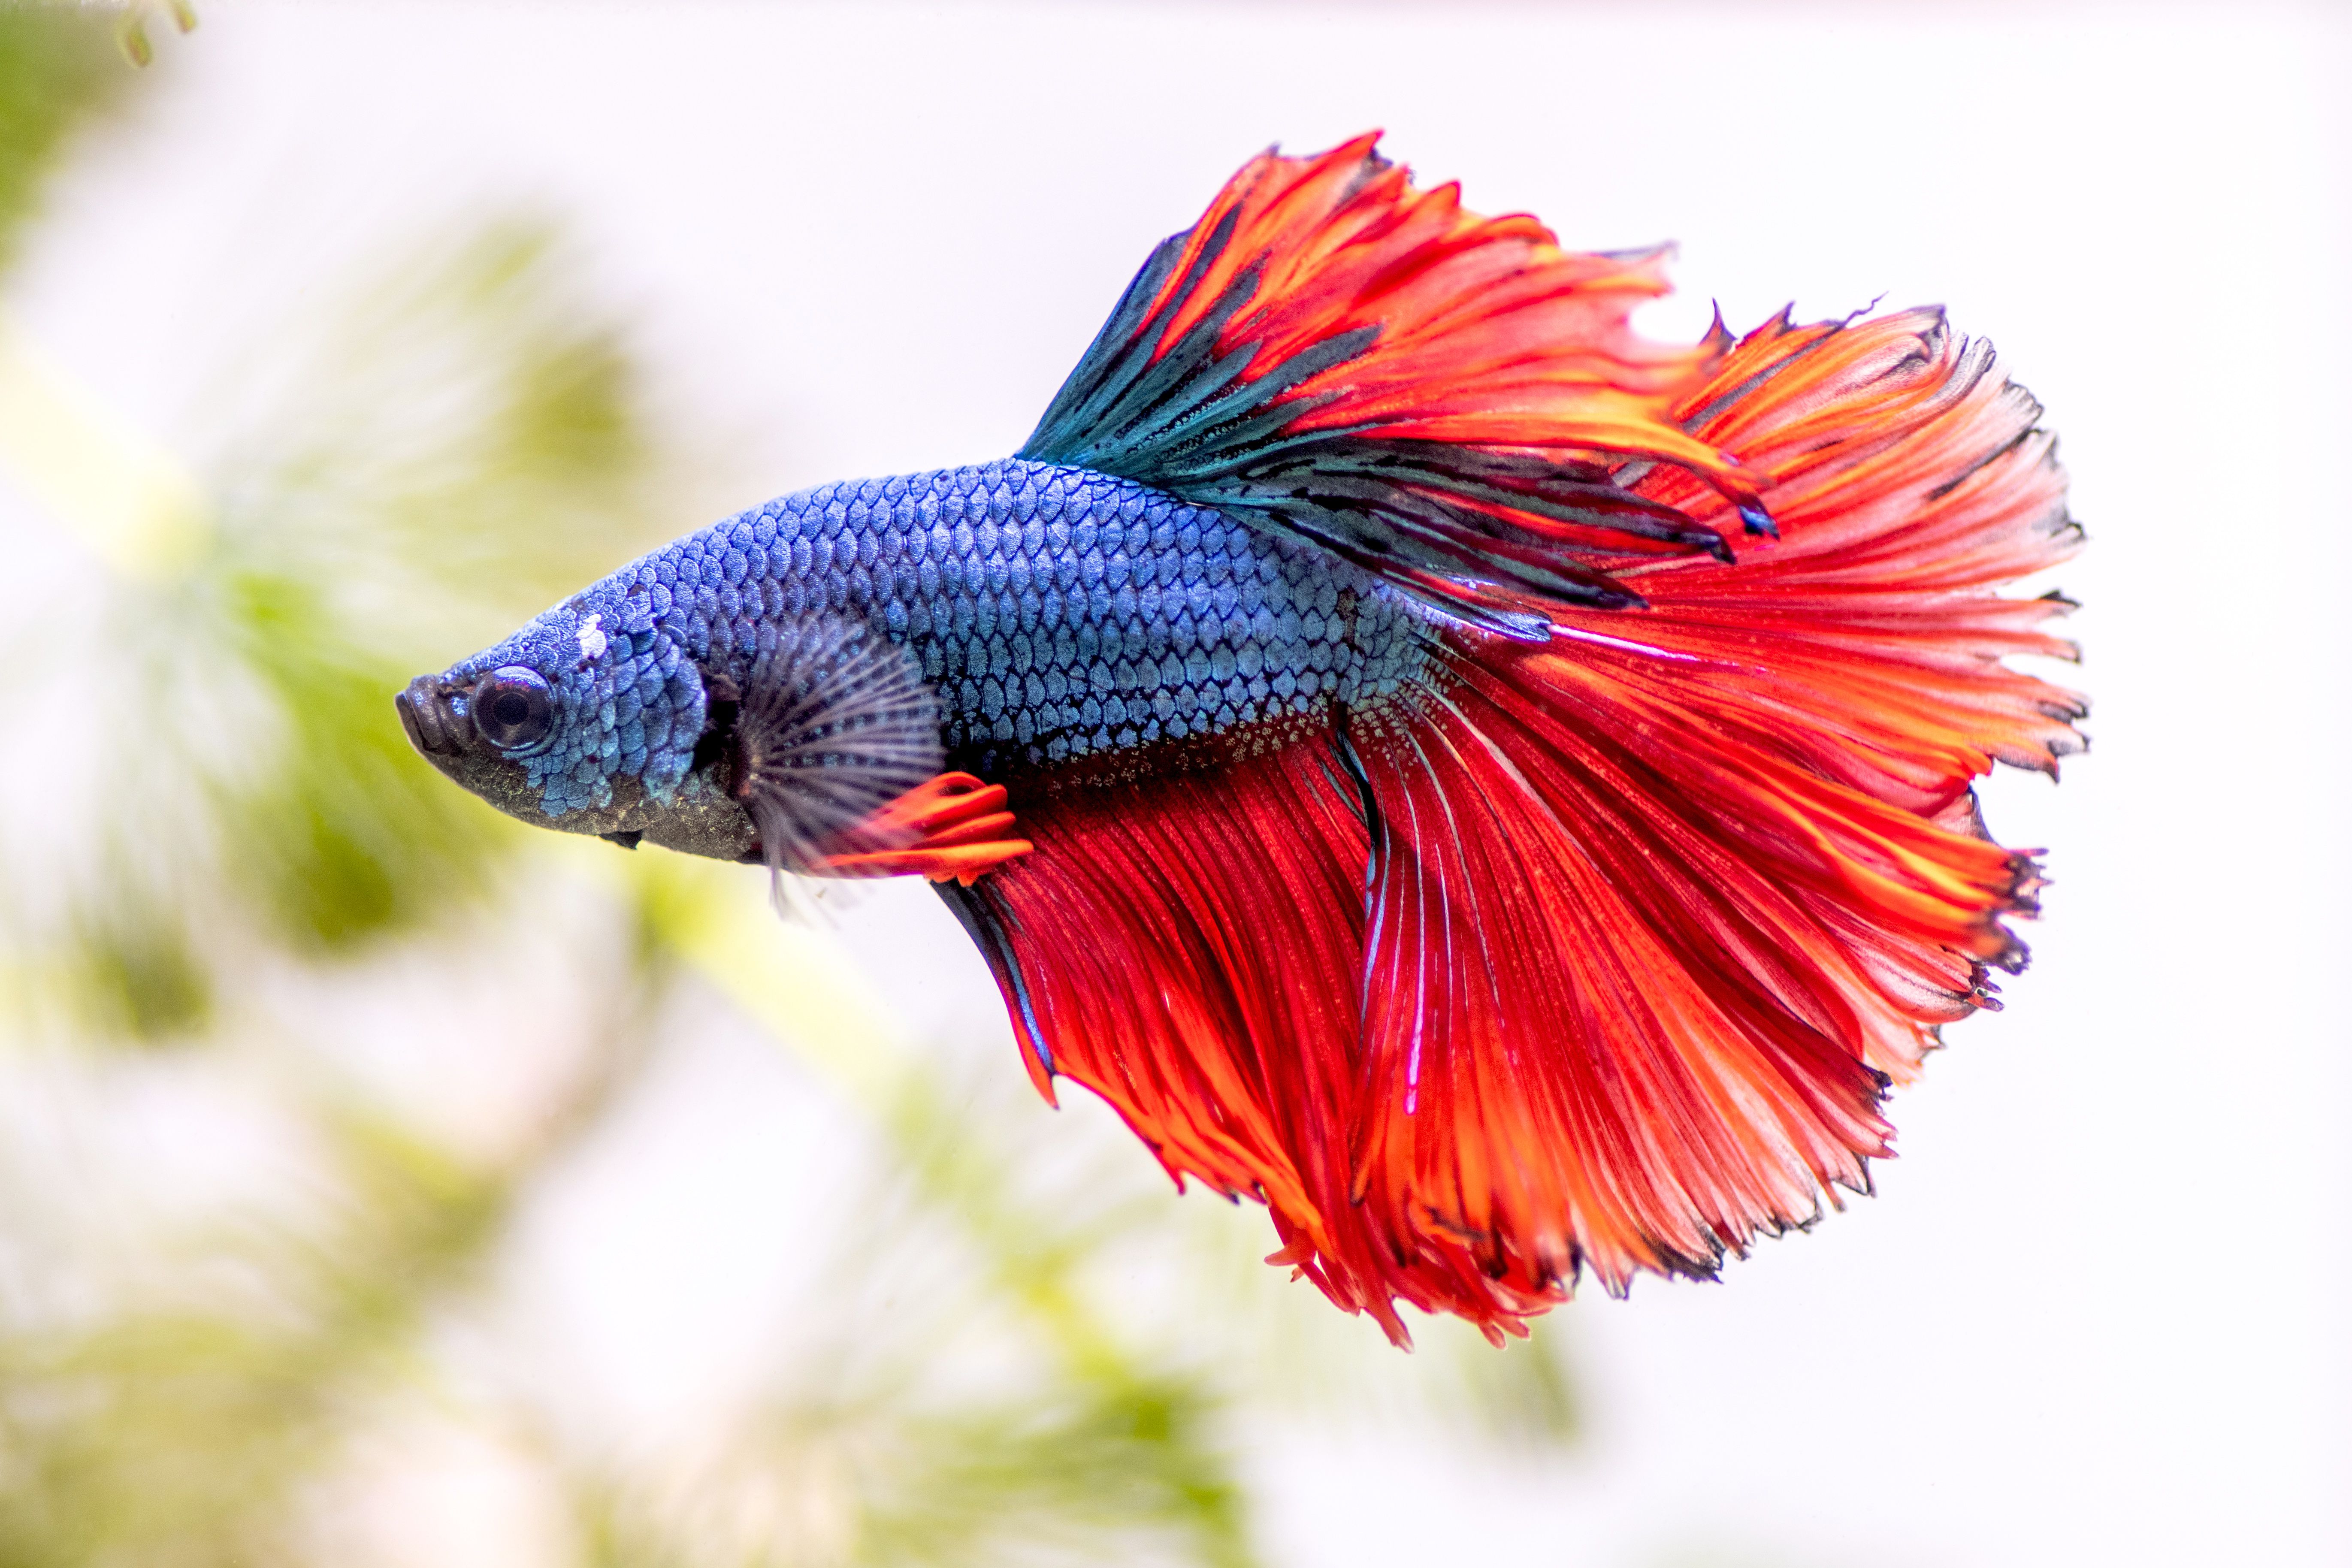 Vibrant and healthy mature betta fish in a well-maintained aquarium